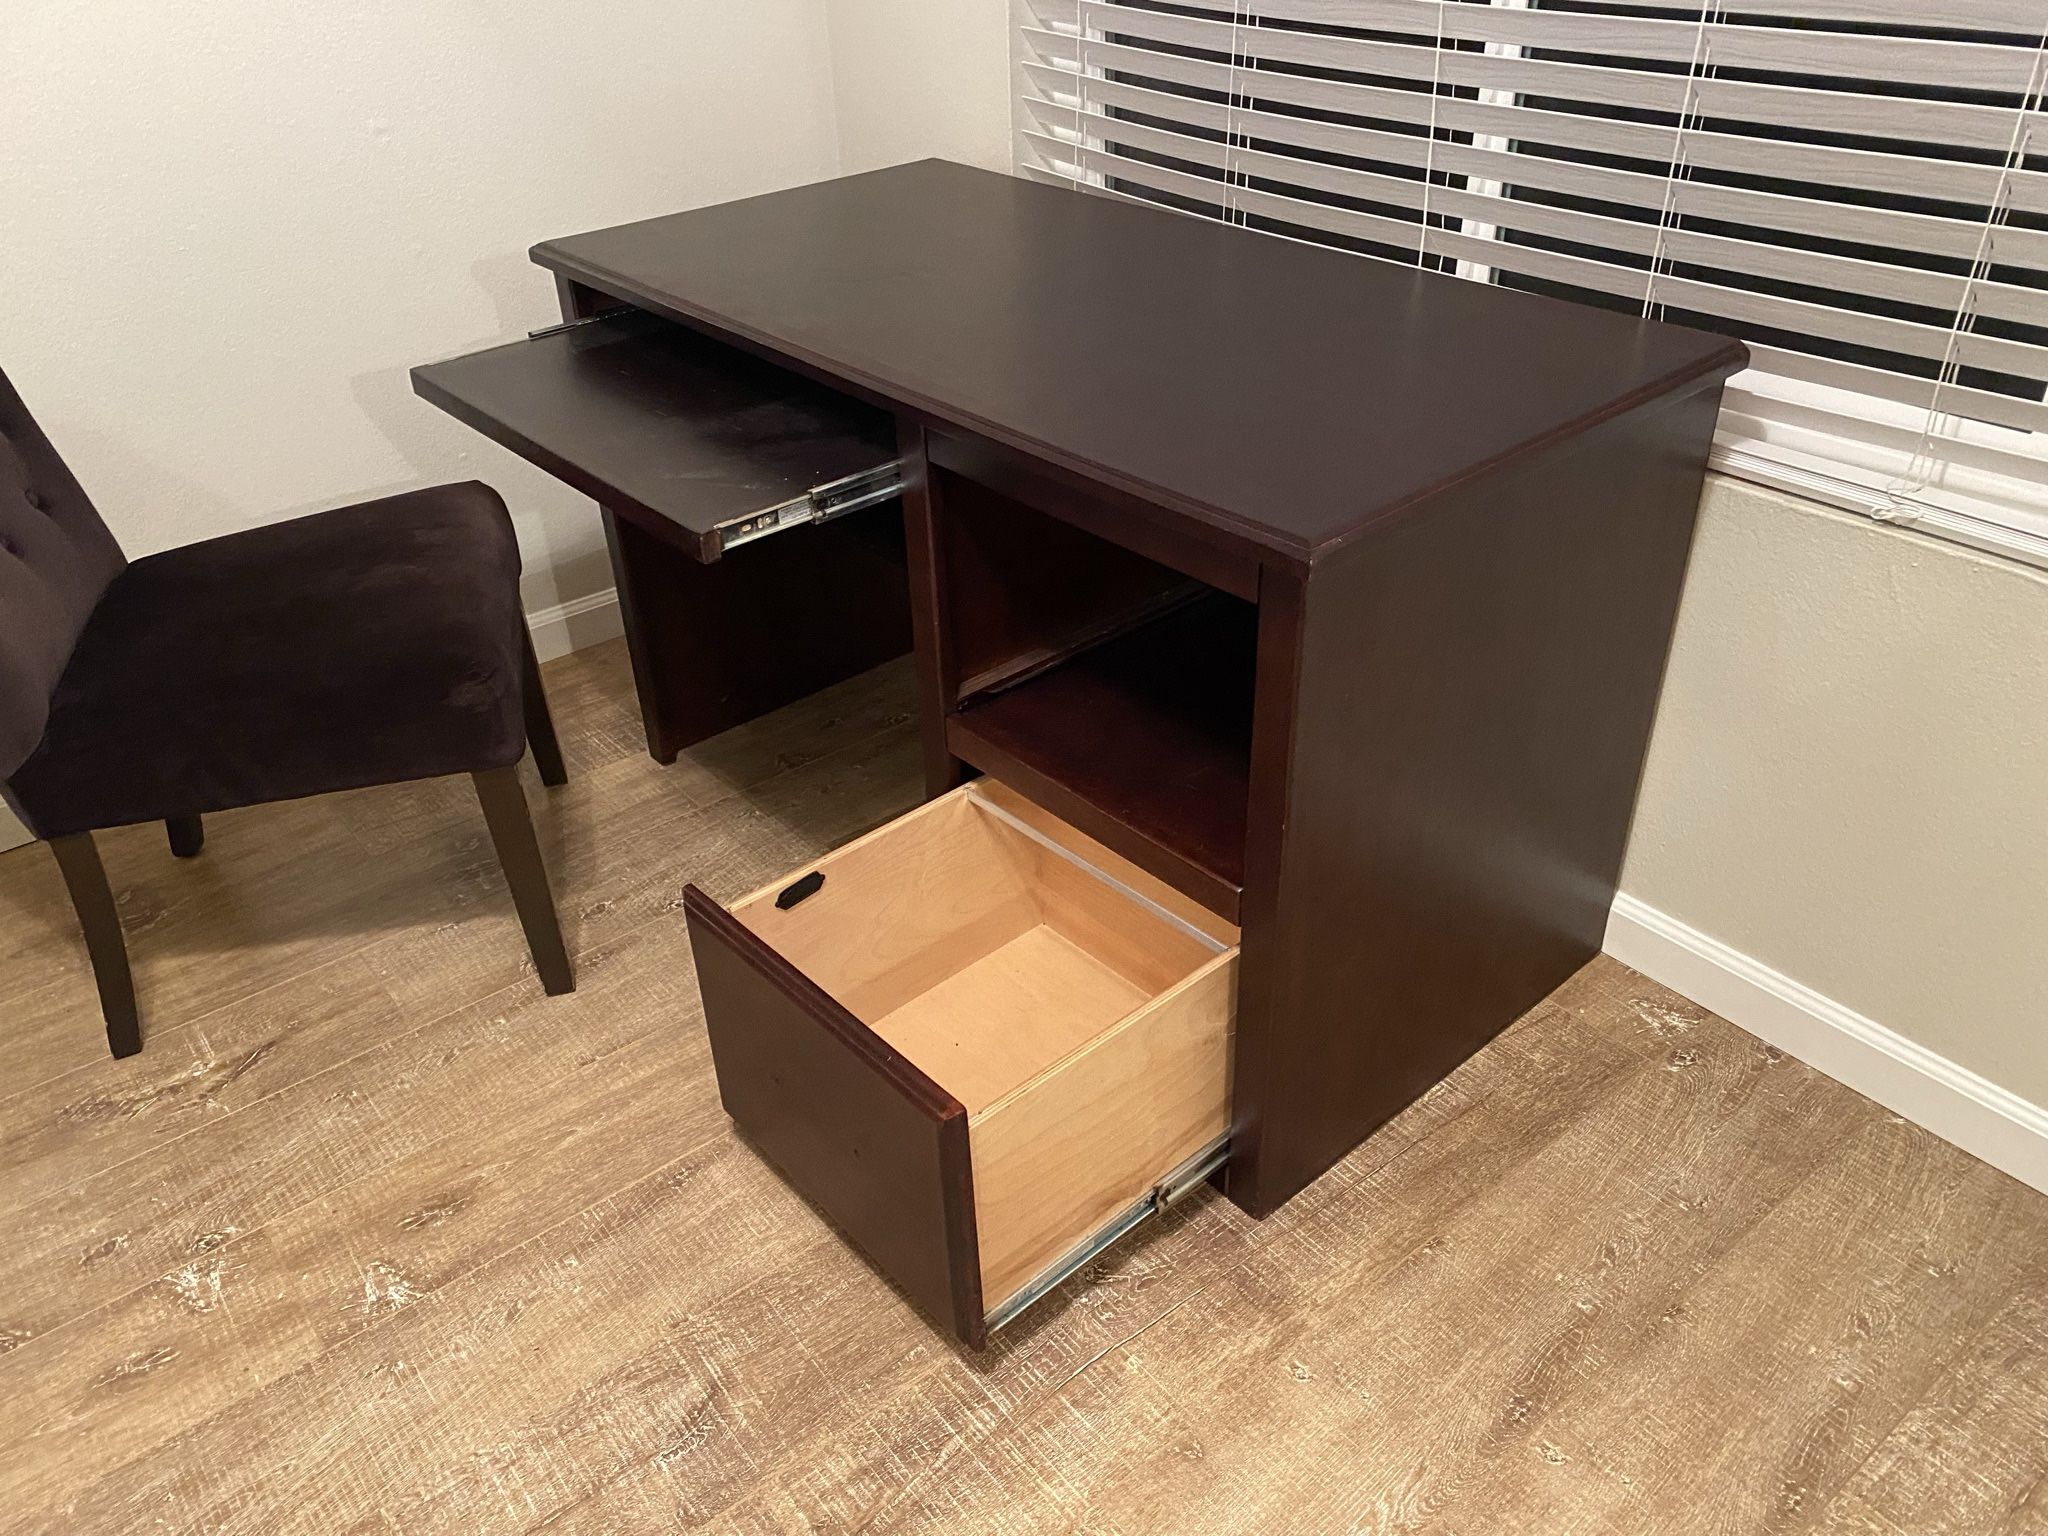 Office Desk - Very Good Condition - Free!